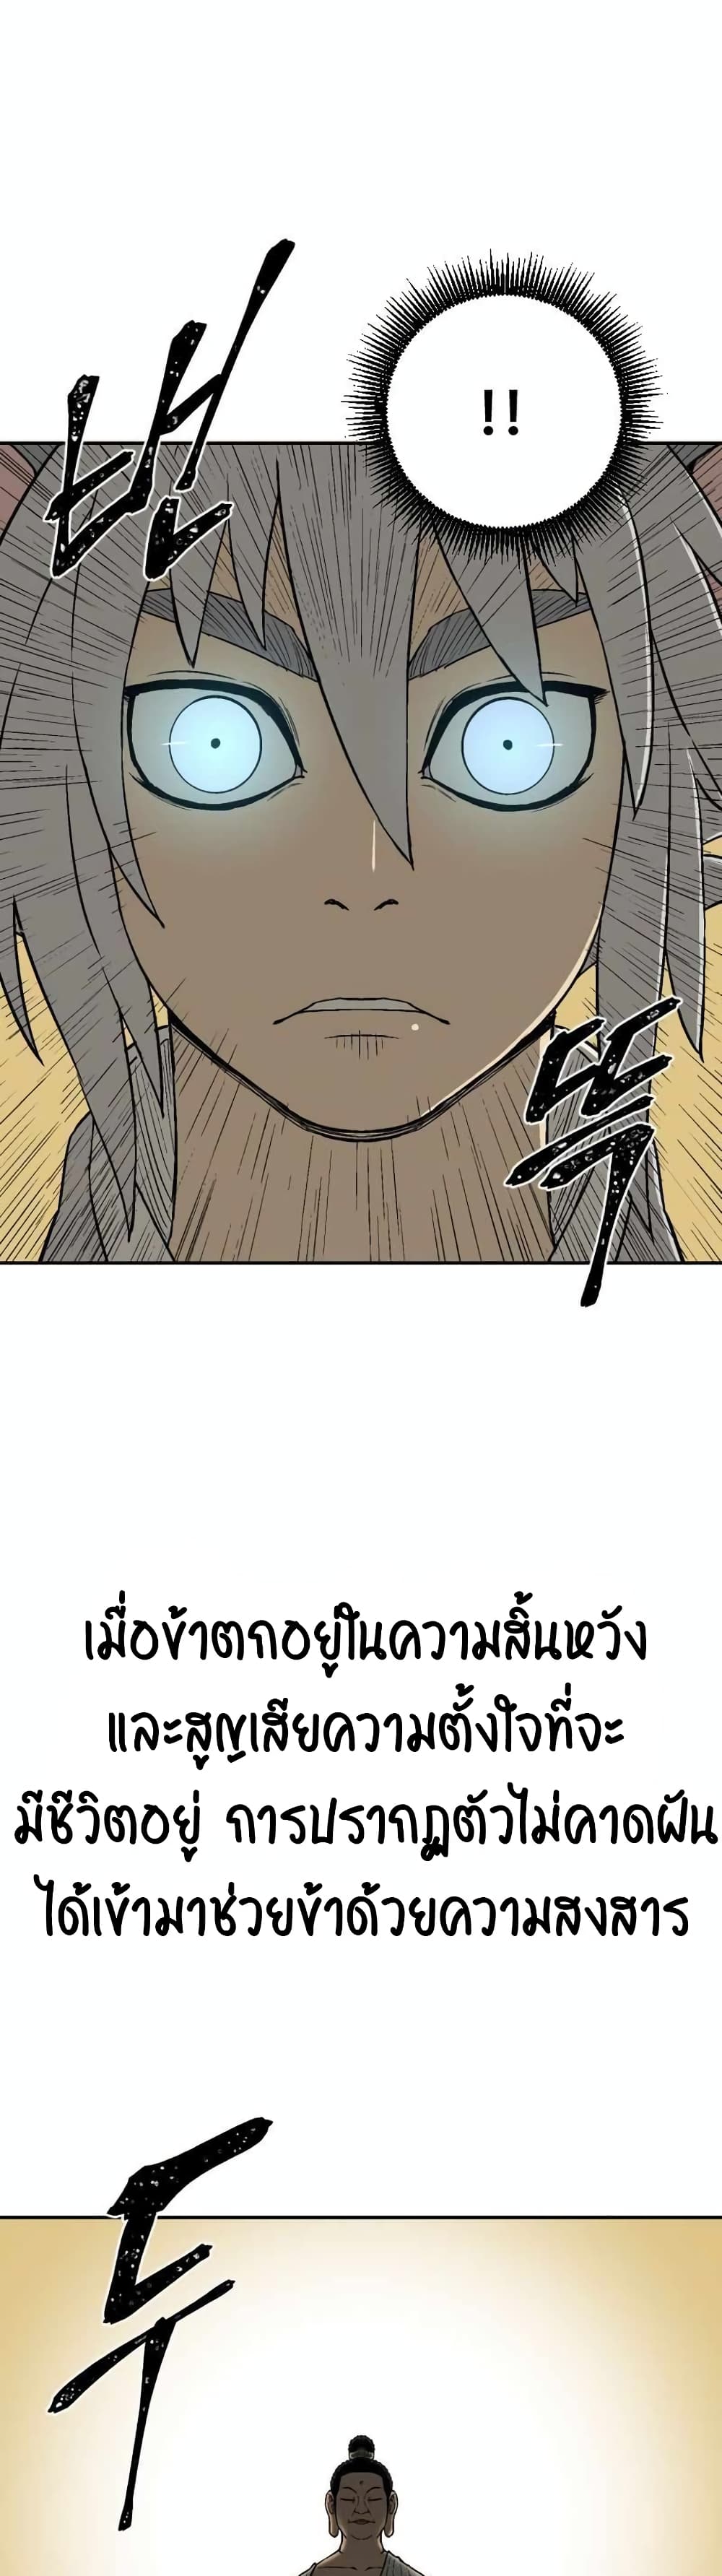 Tales of A Shinning Sword ตอนที่ 2 (21)